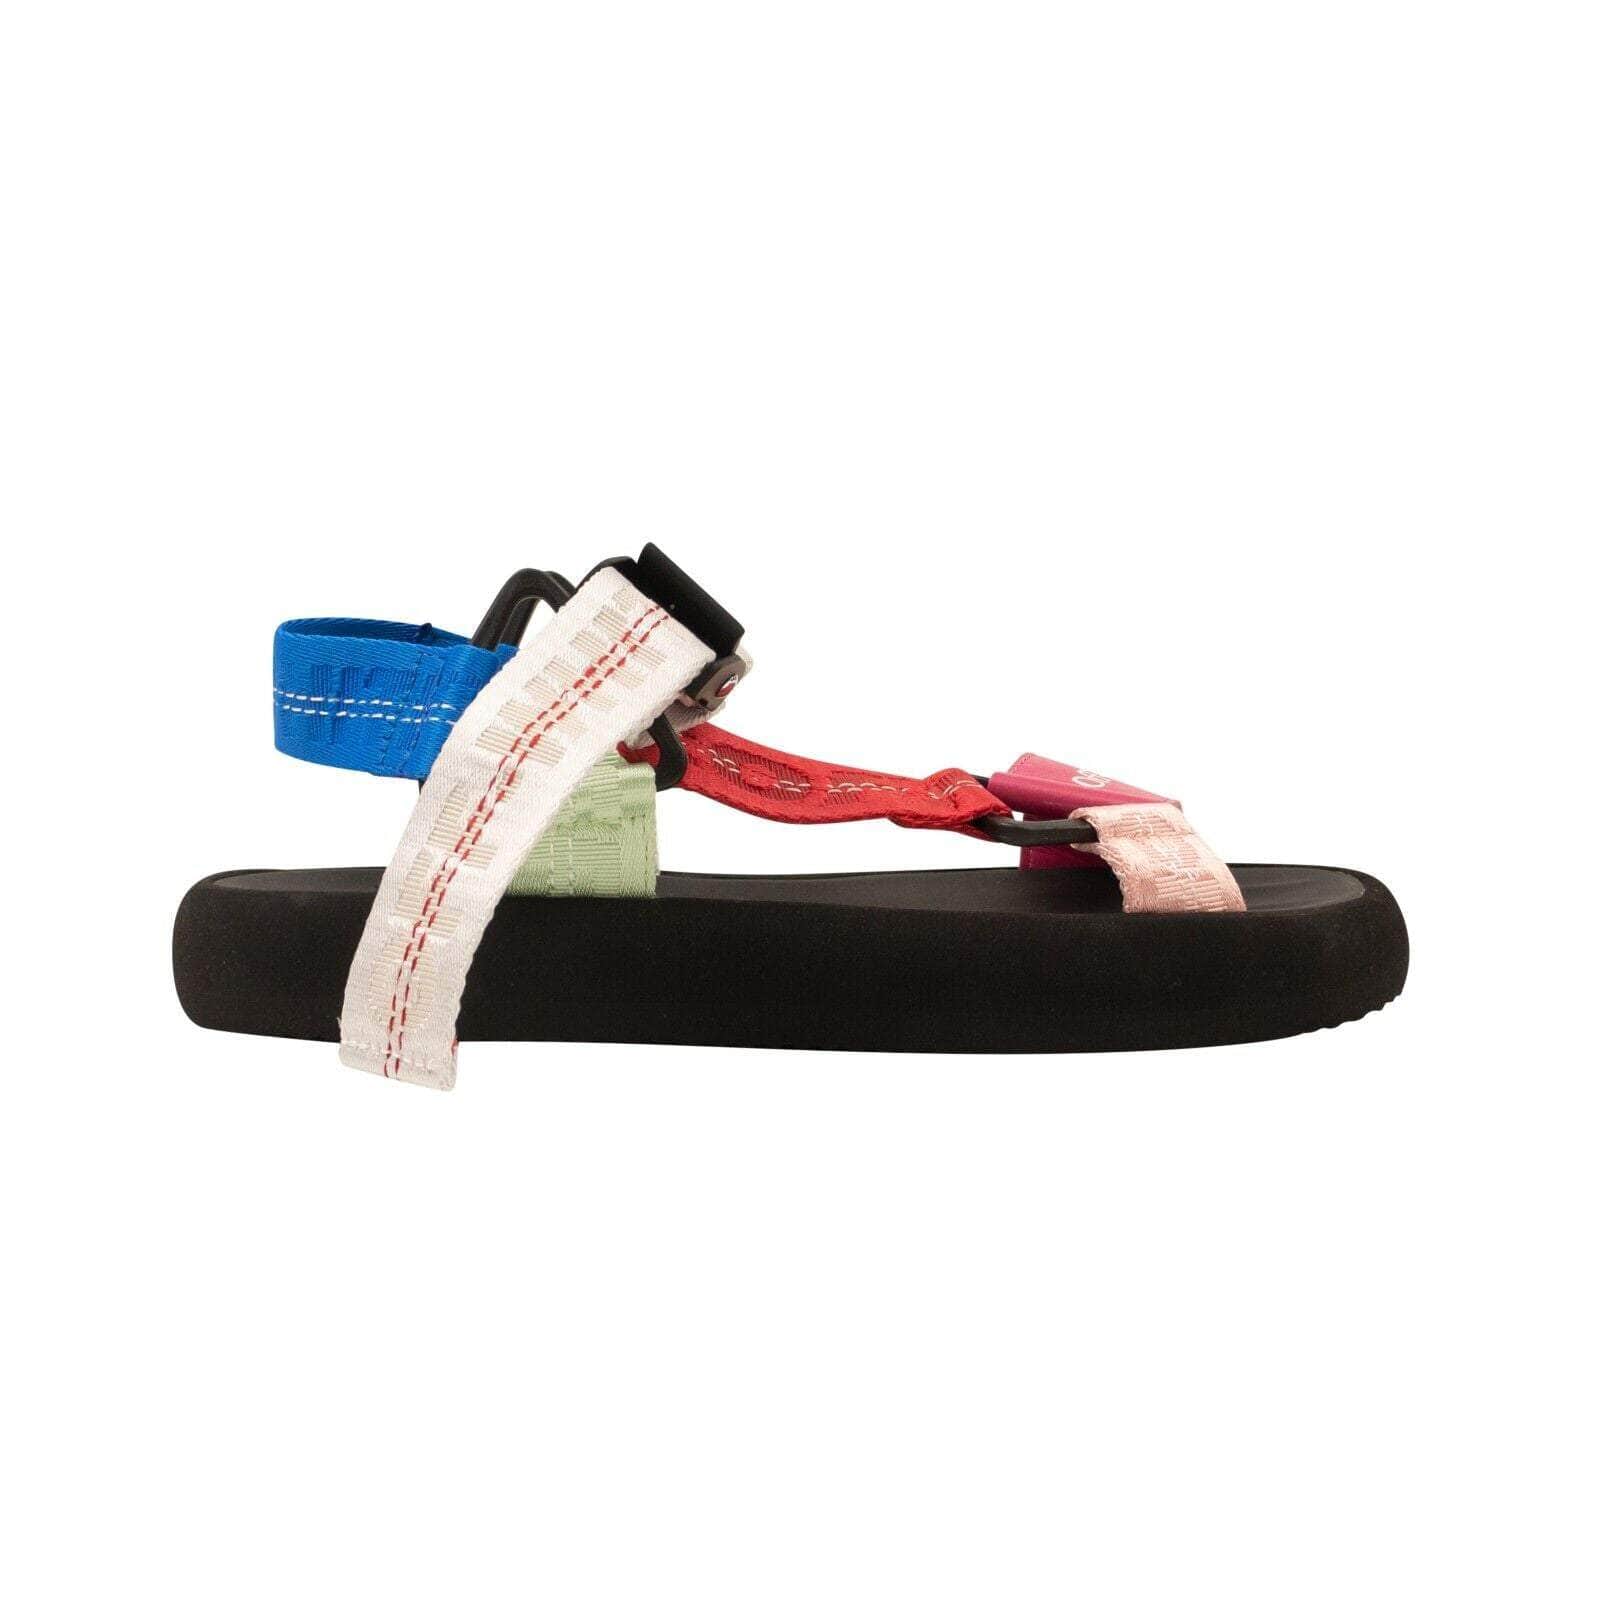 Off-White c/o Virgil Abloh 250-500, channelenable-all, chicmi, couponcollection, gender-womens, main-shoes, off-white, off-white-c-o-virgil-abloh, OFW2, owjuly4, owshoes&acc, size-35, womens-sandals-flip-flops 35 Multi Industrial Trek Sandals 95-OFW-2212/35 95-OFW-2212/35